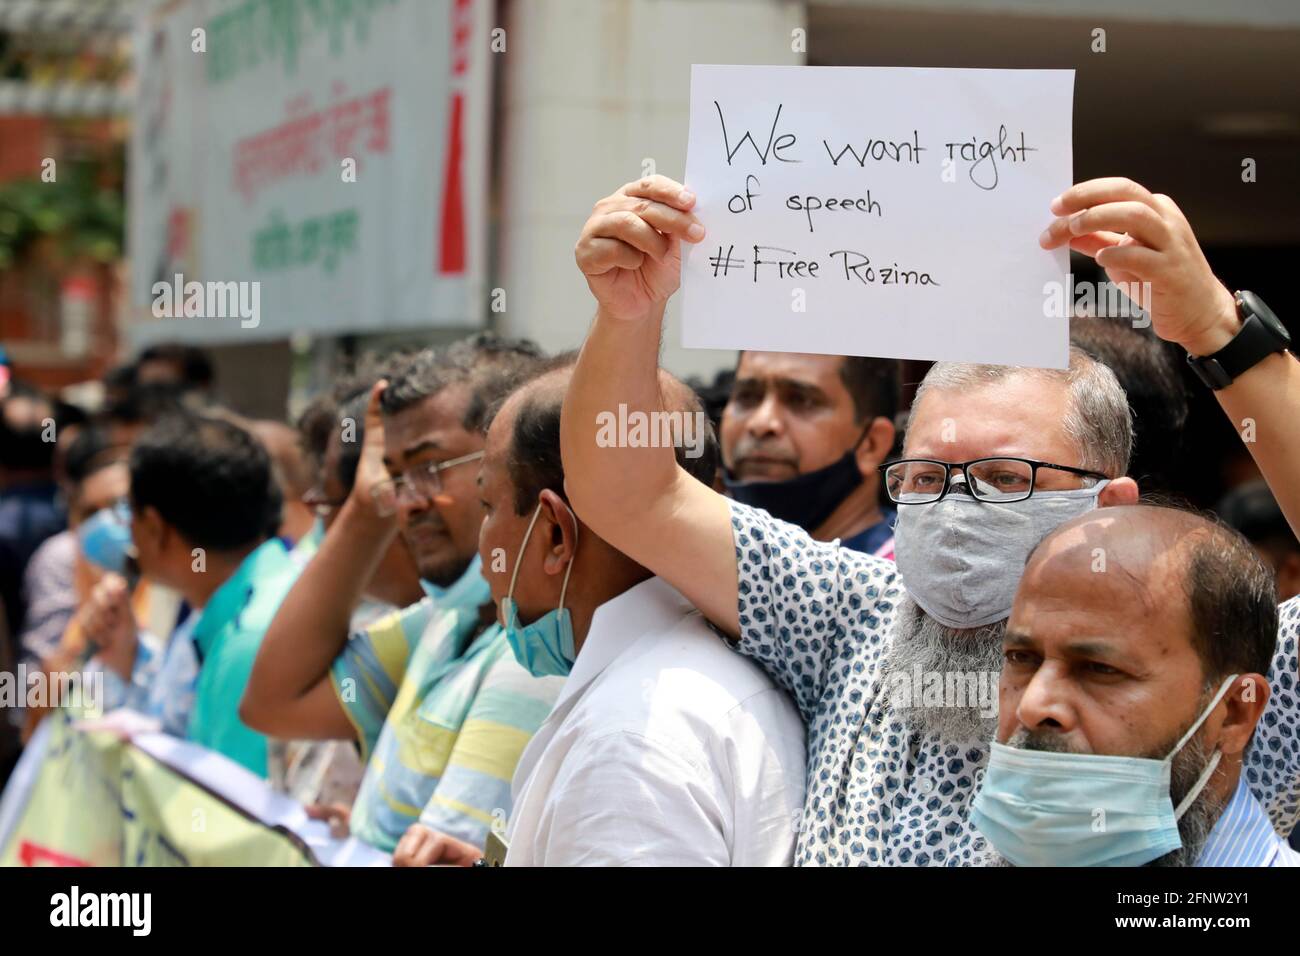 May, 19, 2021 Journalists hold a demonstration in front of the Secretariat to demand the release of Prothom Alo senior reporter Rozina Islam, who was Stock Photo